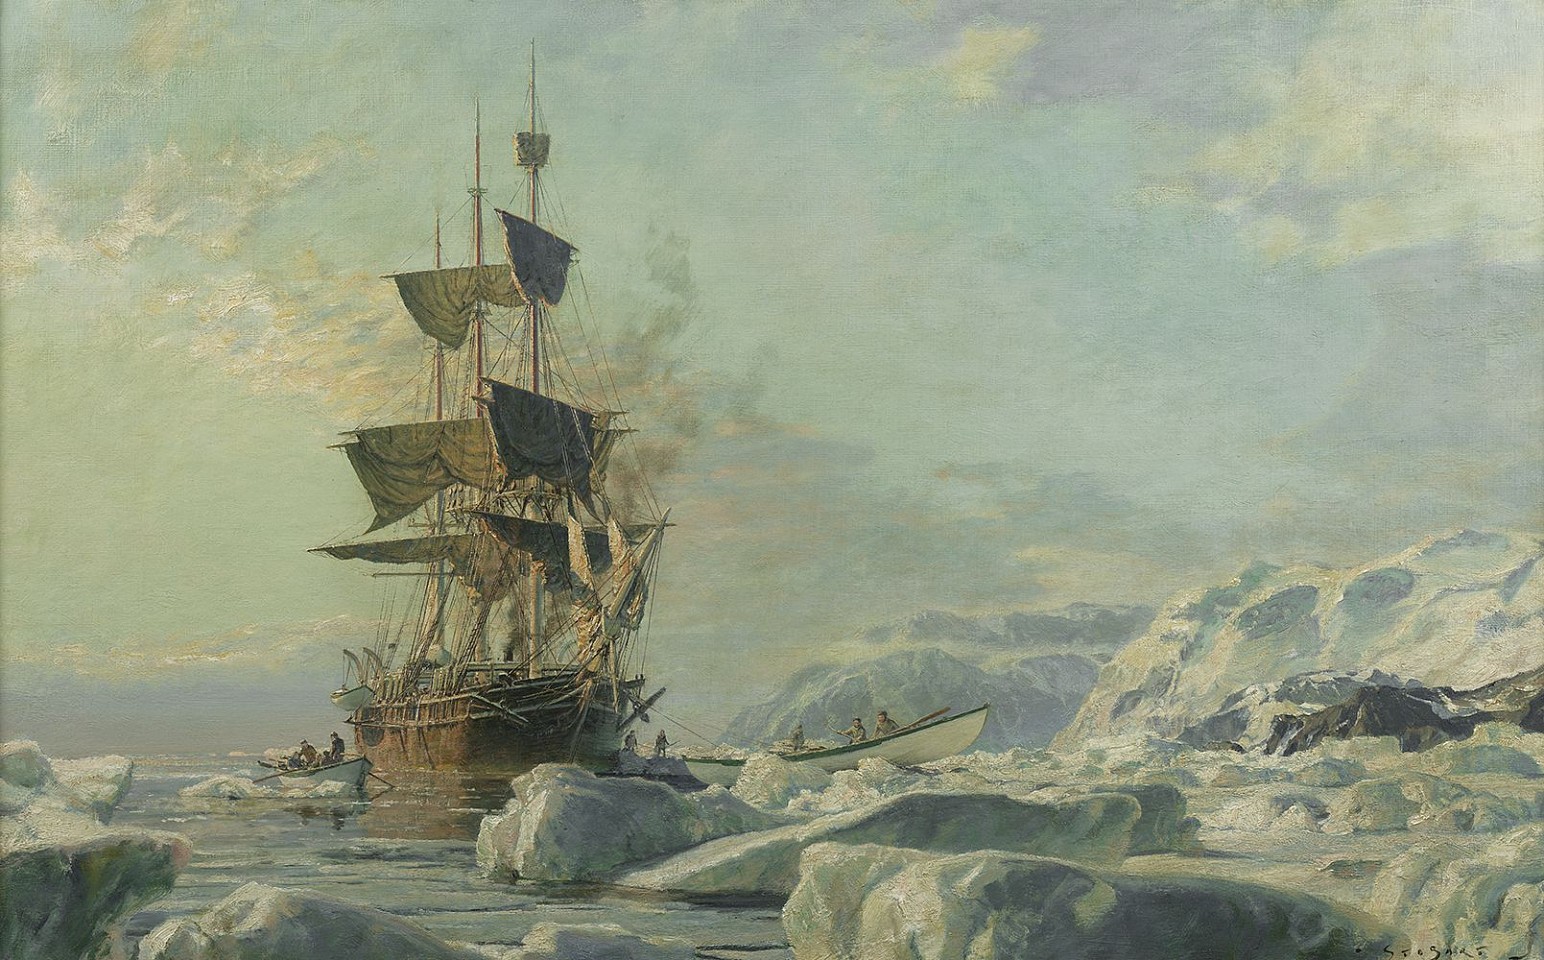 John Stobart, The Whaling Bark Charles W. Morgan, c. 1970
oil on canvas, 24 x 38 in. (61 x 96.5 cm)
JS1043